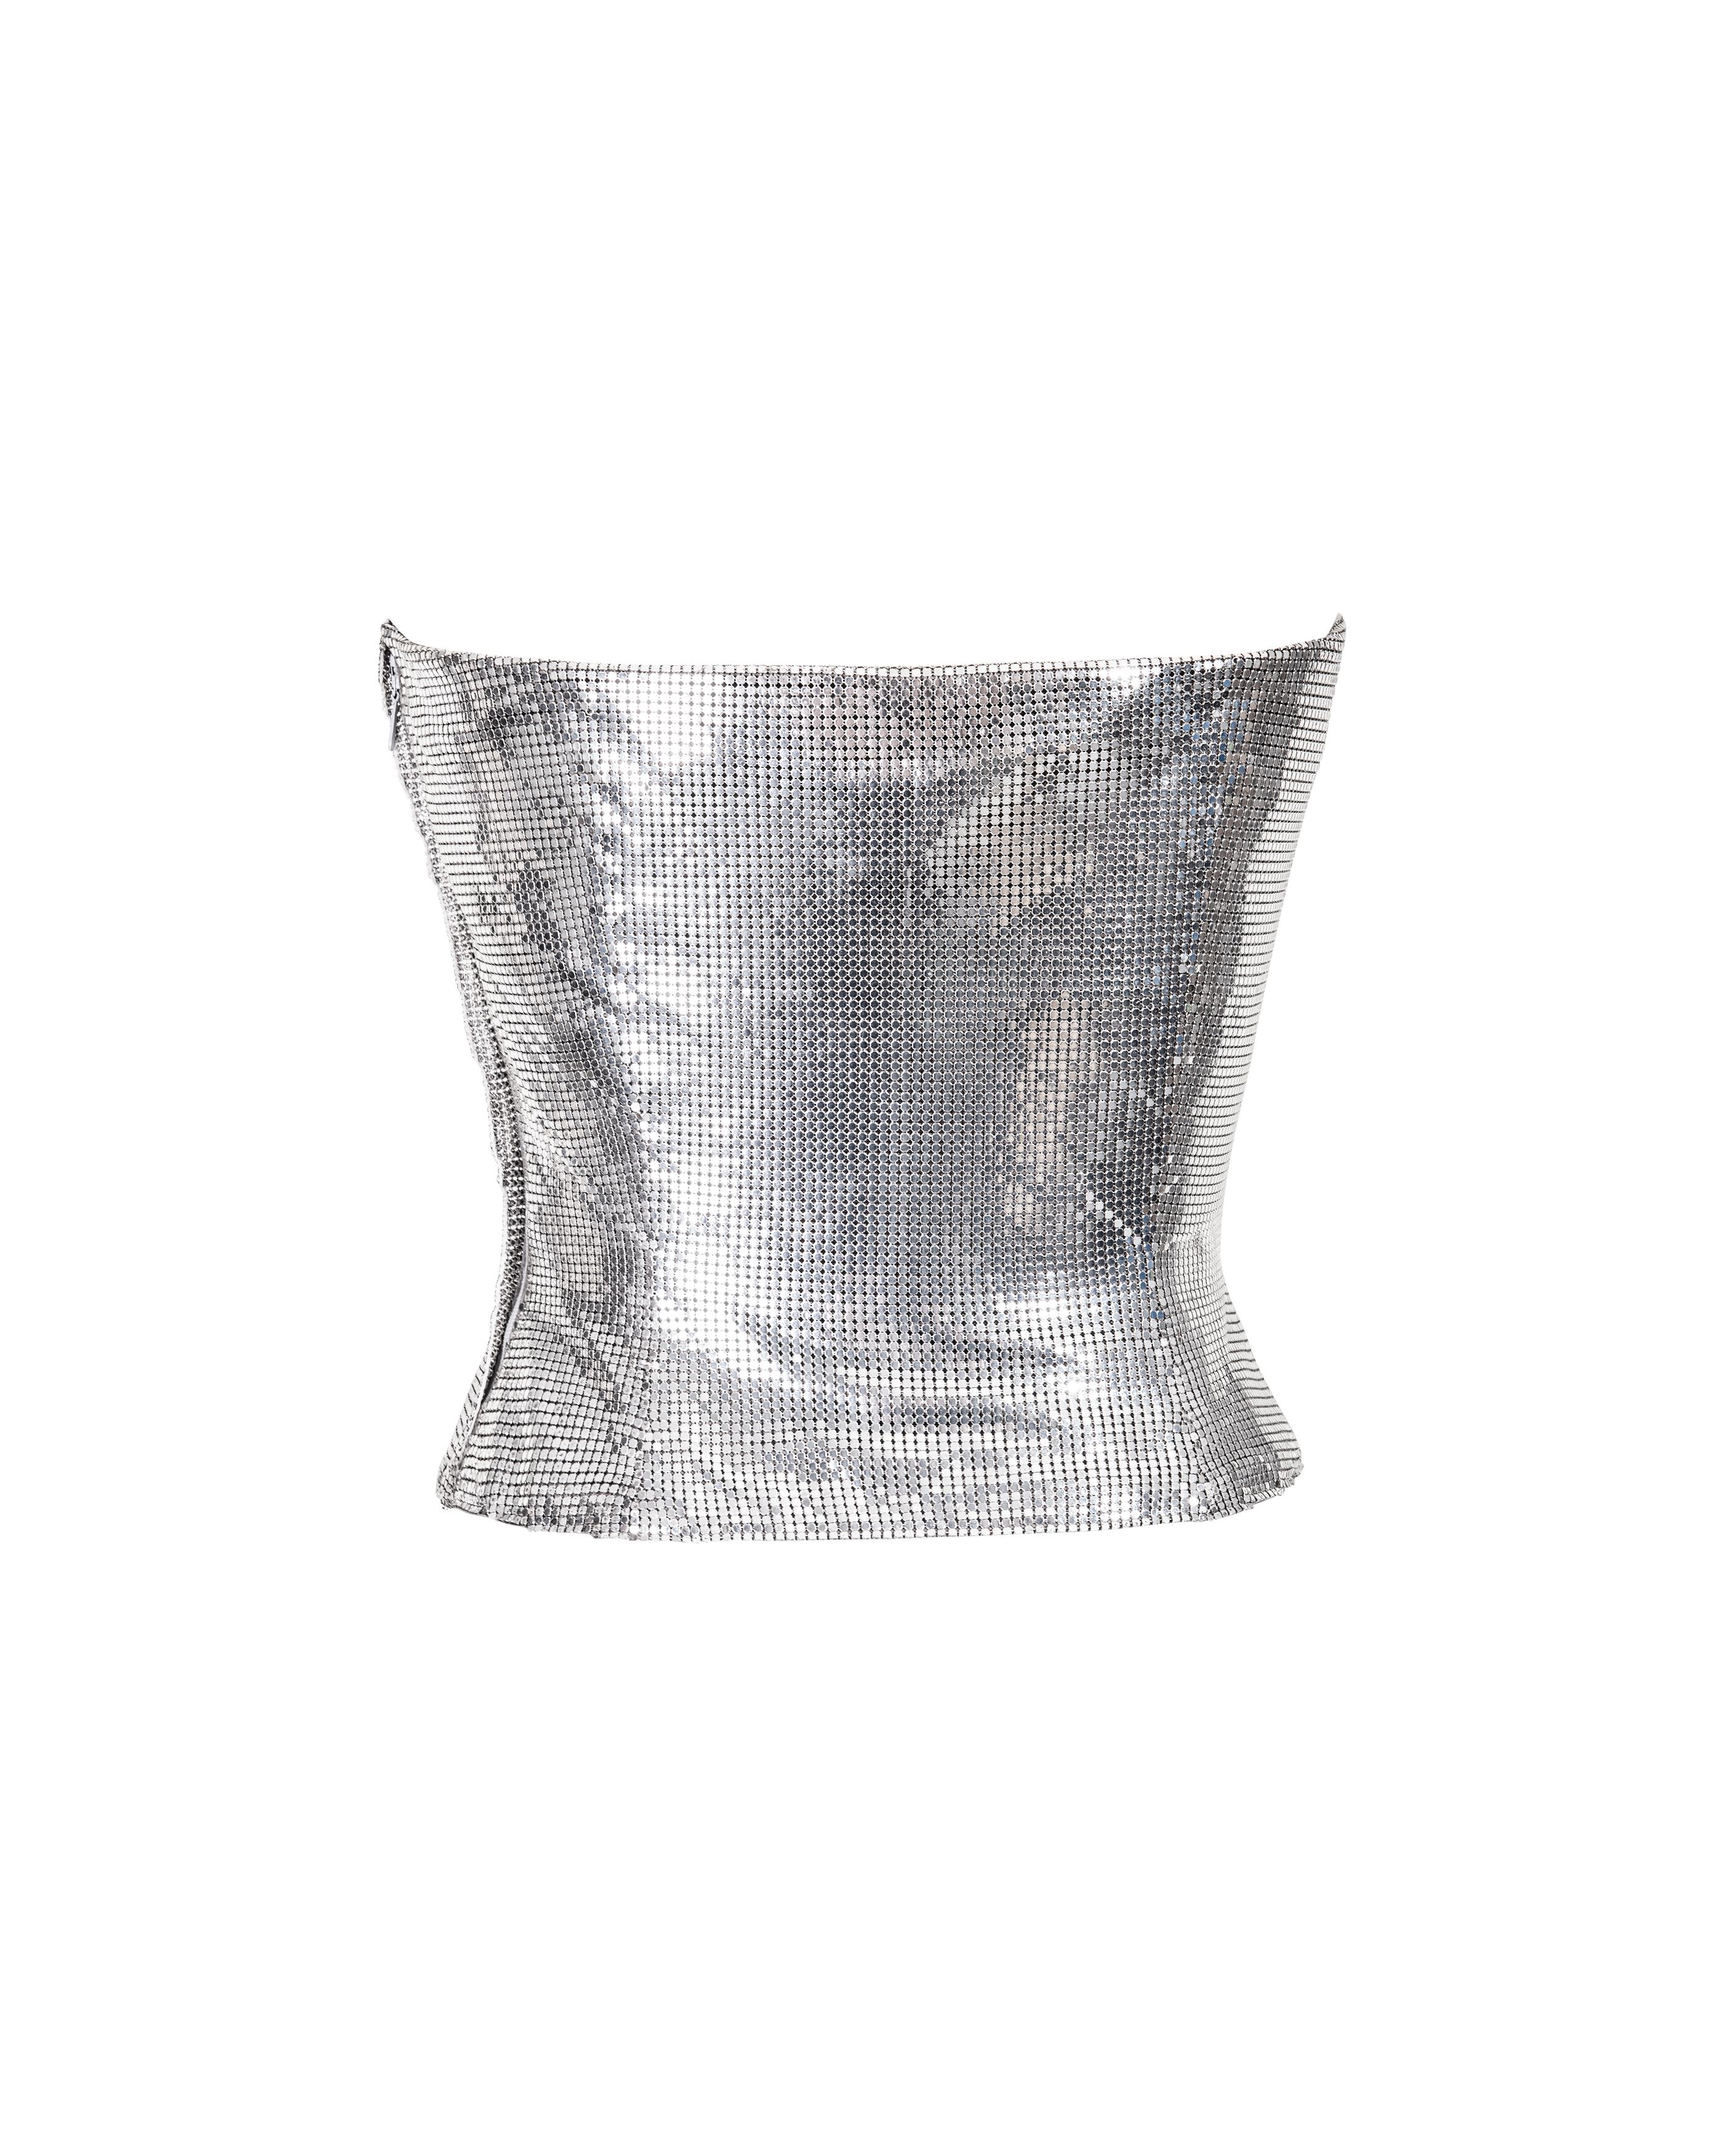 A/W 1998 Gianni Versace Silver Oroton Chainmail Corset 1